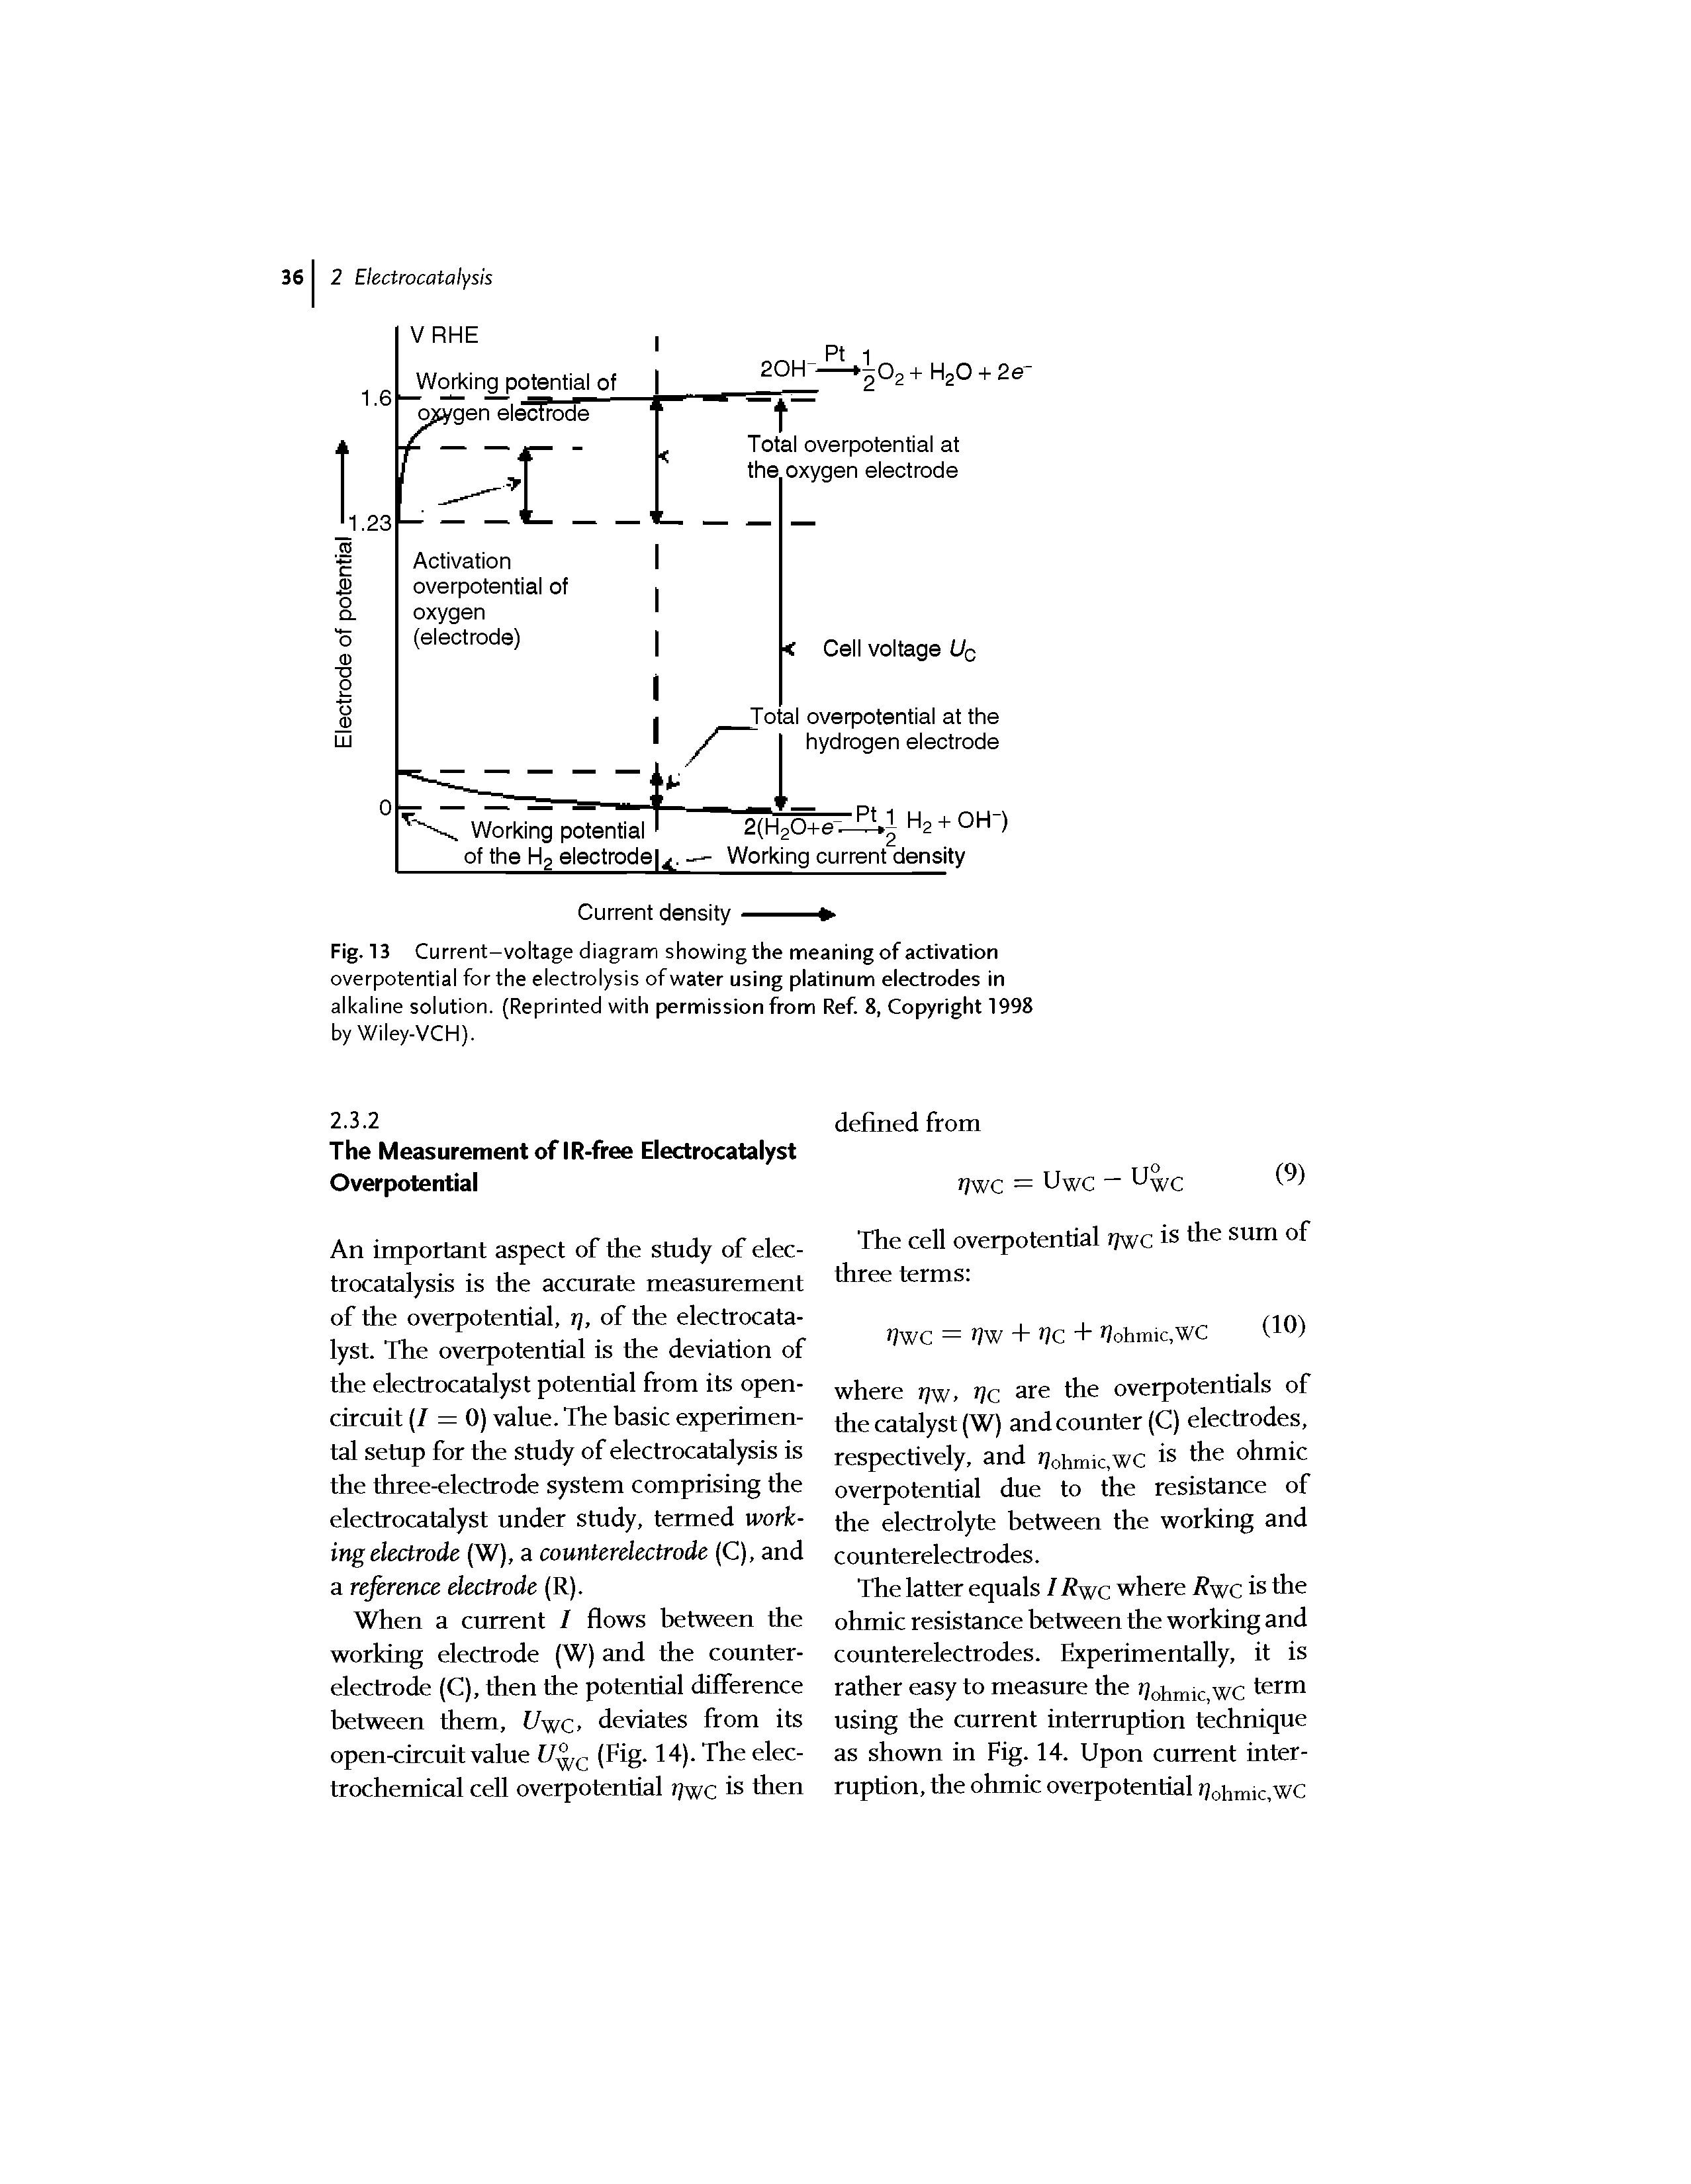 Fig. 13 Current-voltage diagram showingthe meaning of activation overpotential for the electrolysis of water using platinum electrodes in alkaline solution. (Reprinted with permission from Ref. 8, Copyright 1998 by Wiley-VCH).